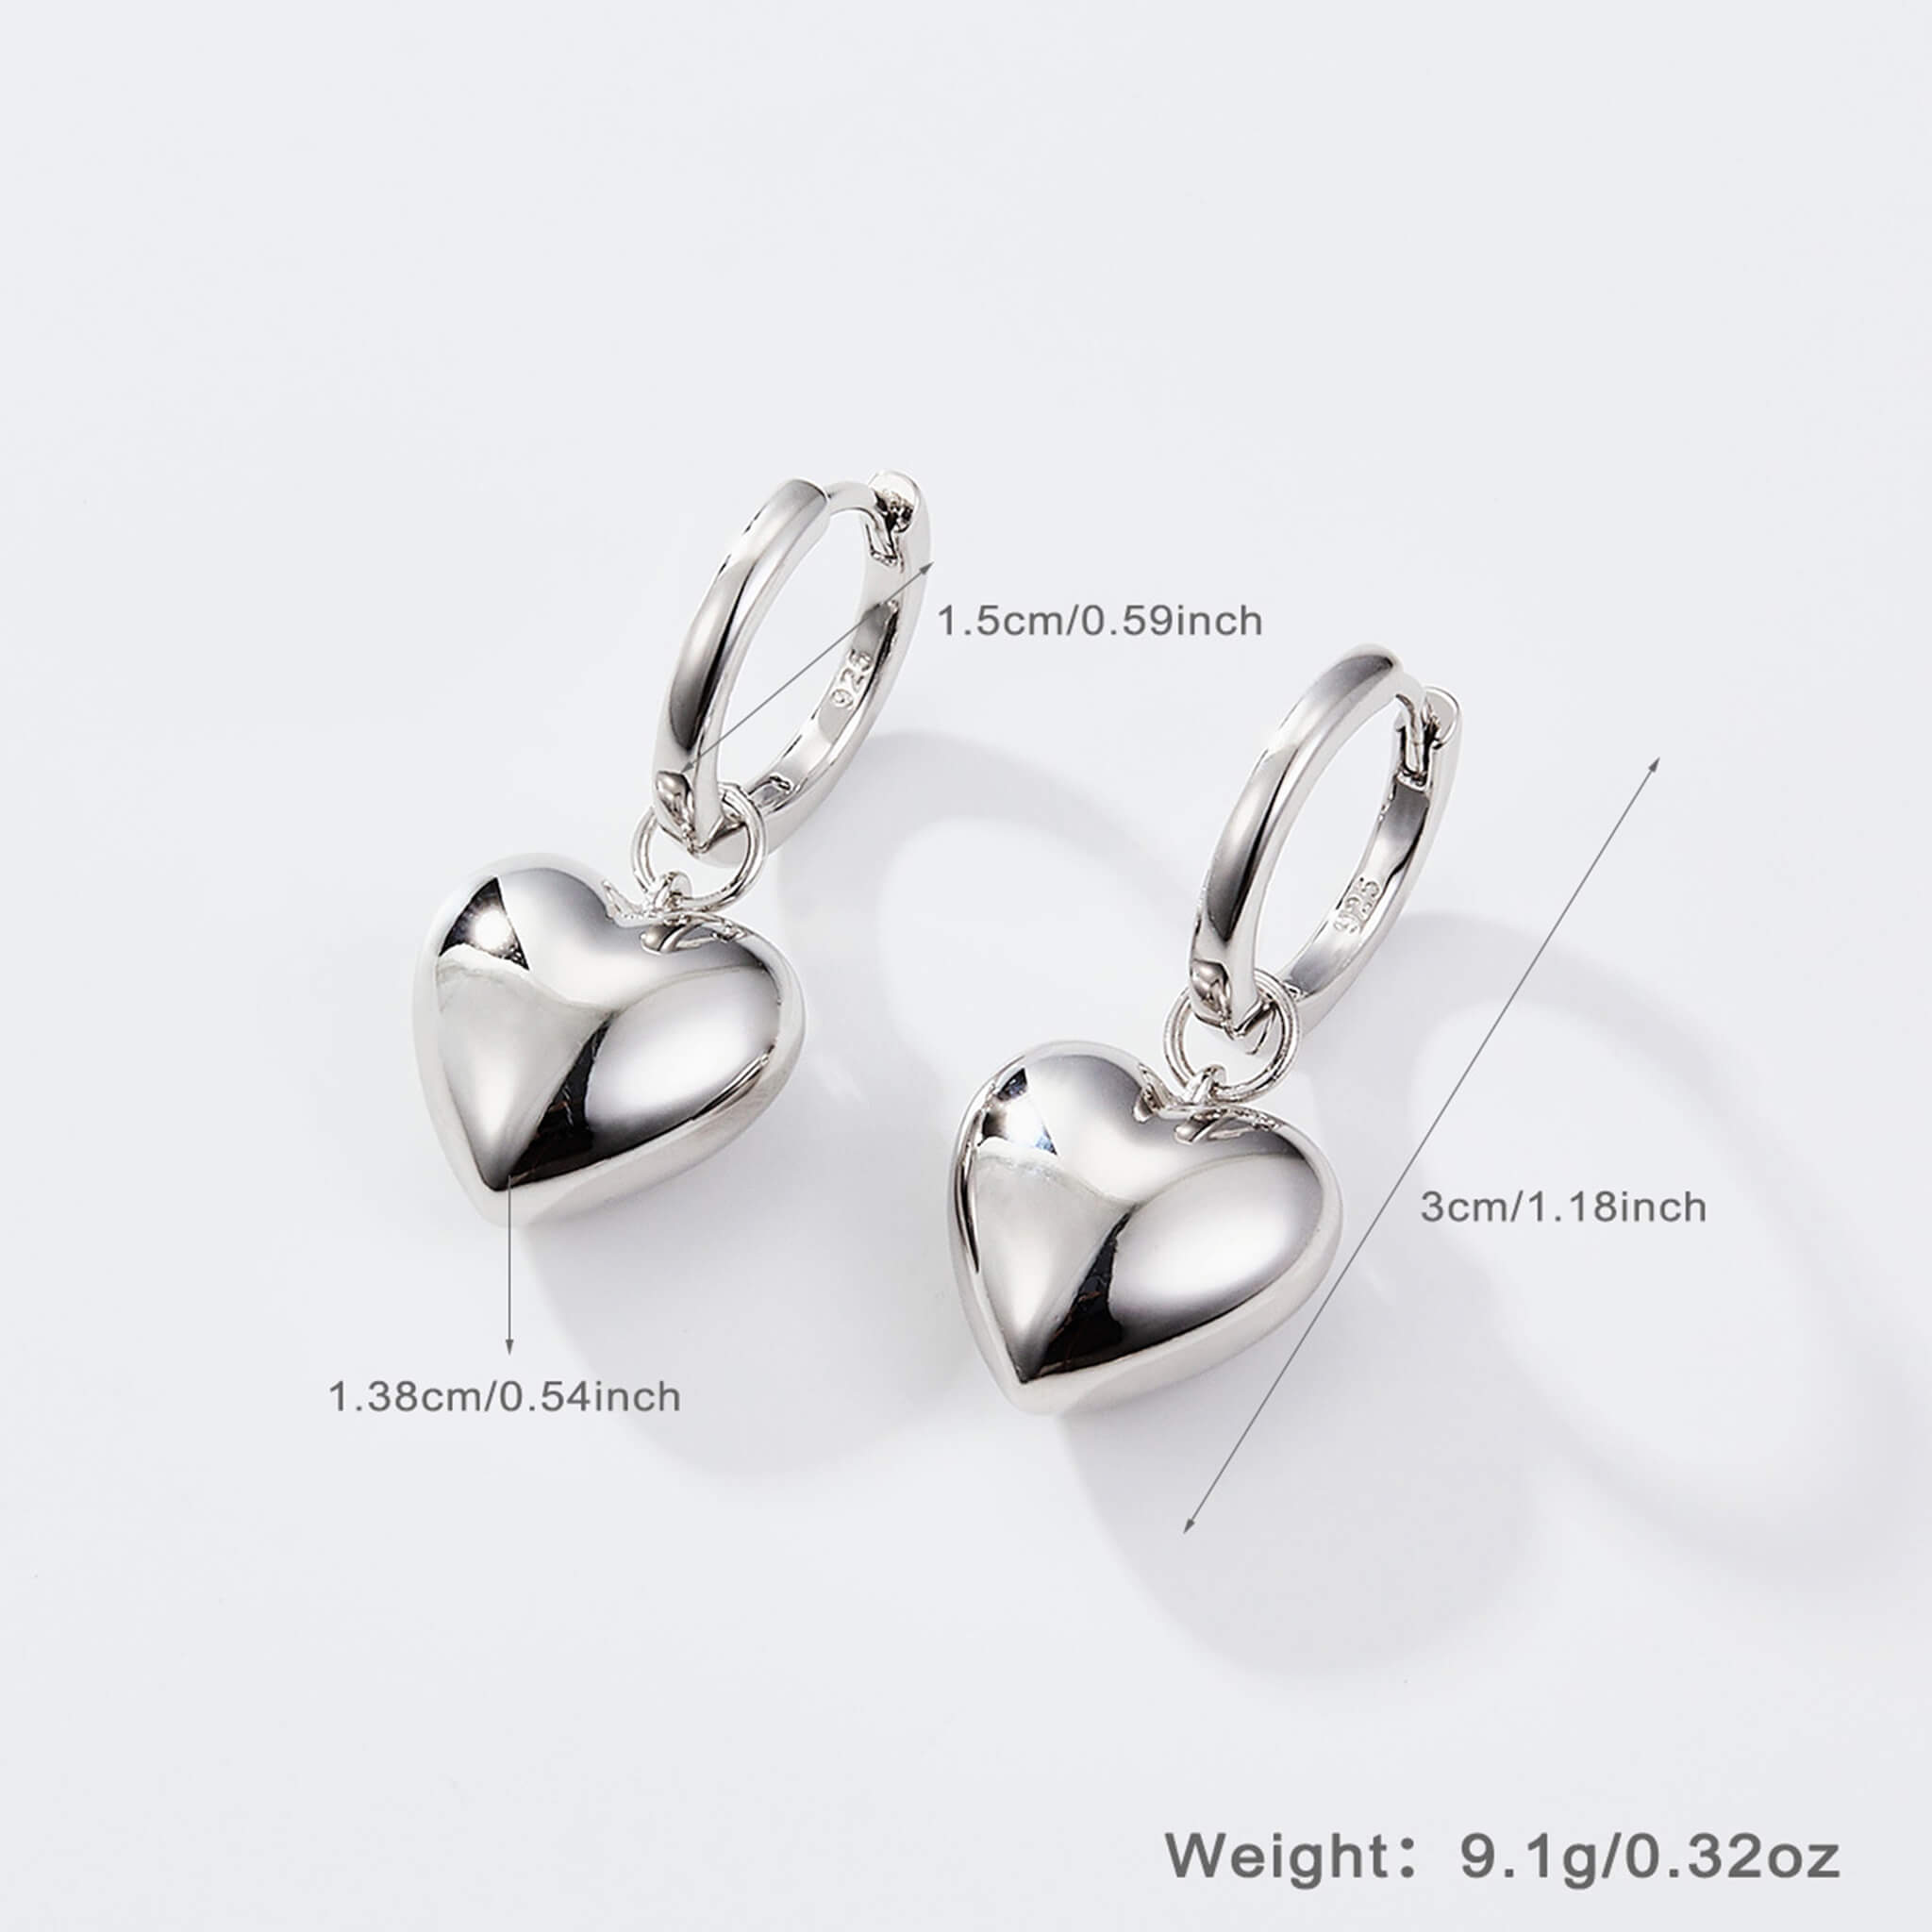 Fashion S925 Silver Heart-shaped Earrings, Perfect for Halloween Gifts  UponBasics   